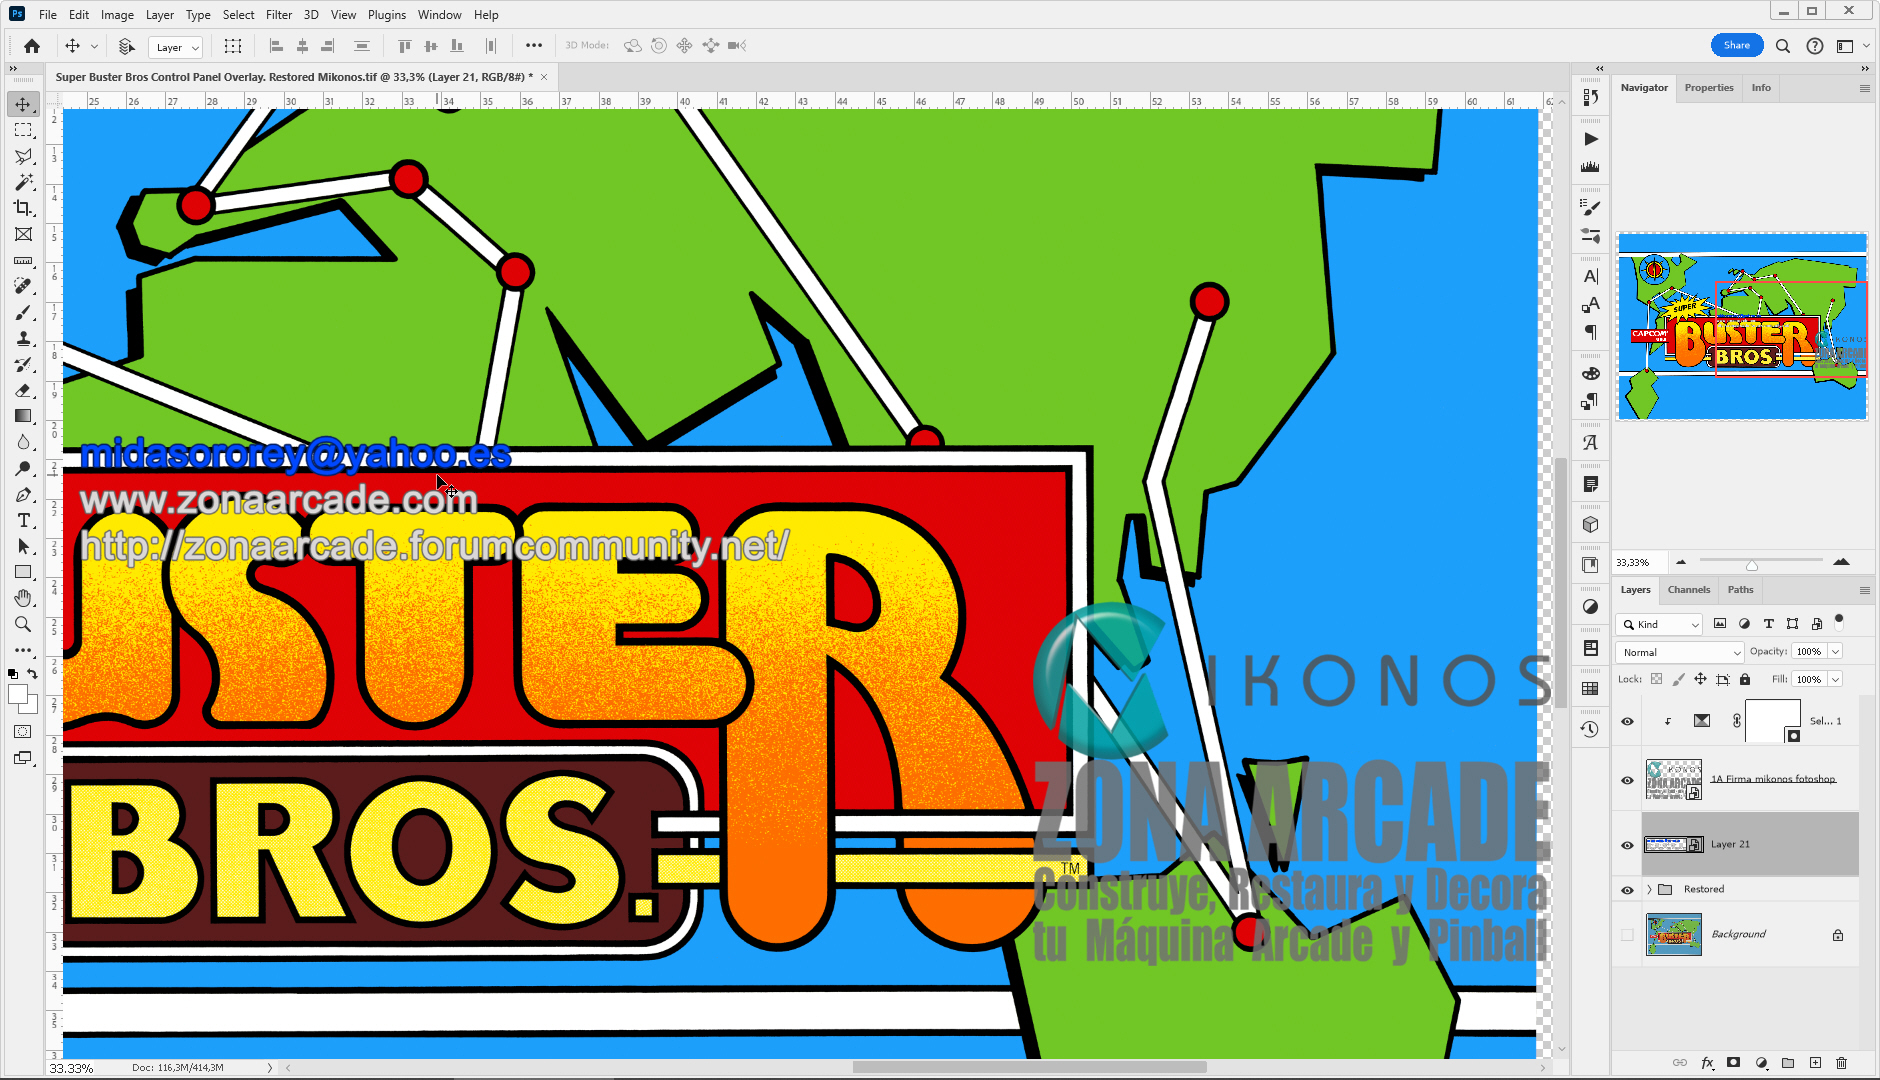 Super-Buster-Bros-Control-Panel-Overlay-Restored-Mikonos3